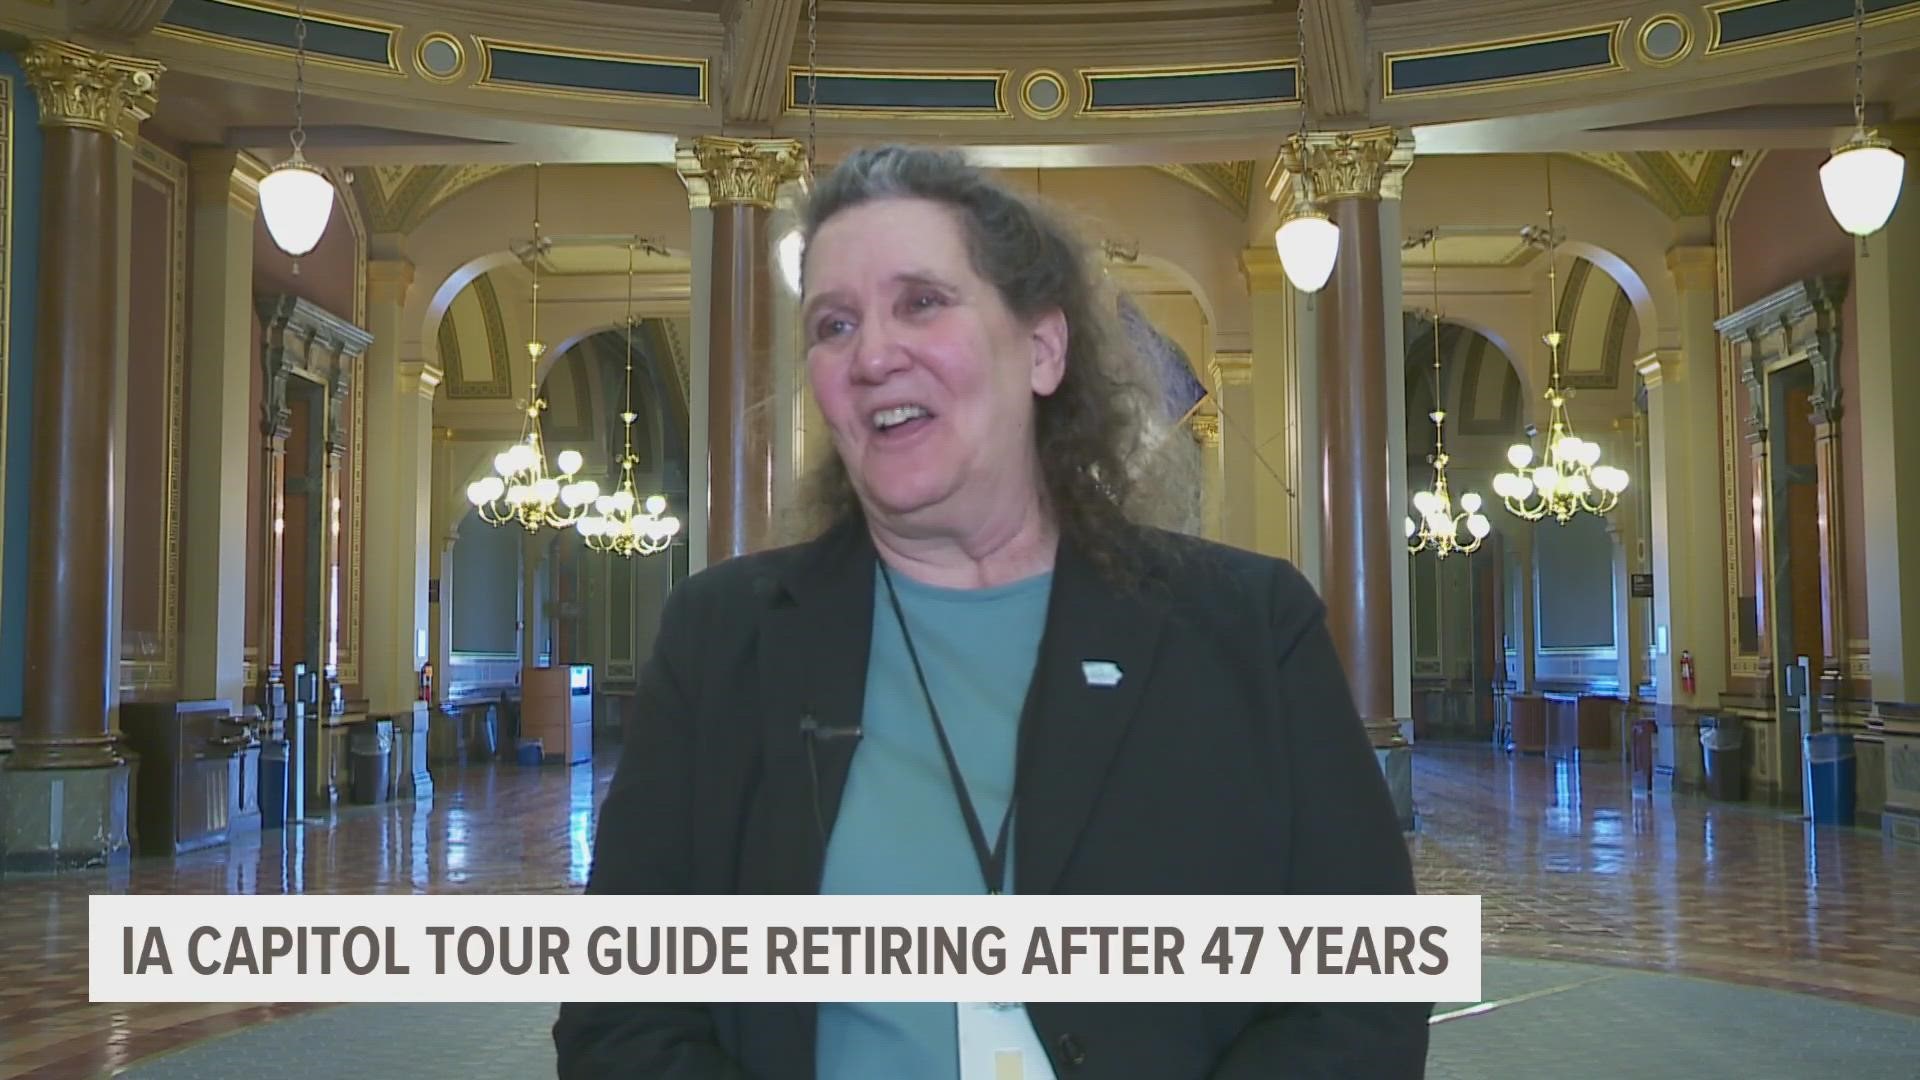 For nearly five decades, Joni Arnett has greeted visitors inside the Iowa Capitol, sharing her knowledge and love of the building.